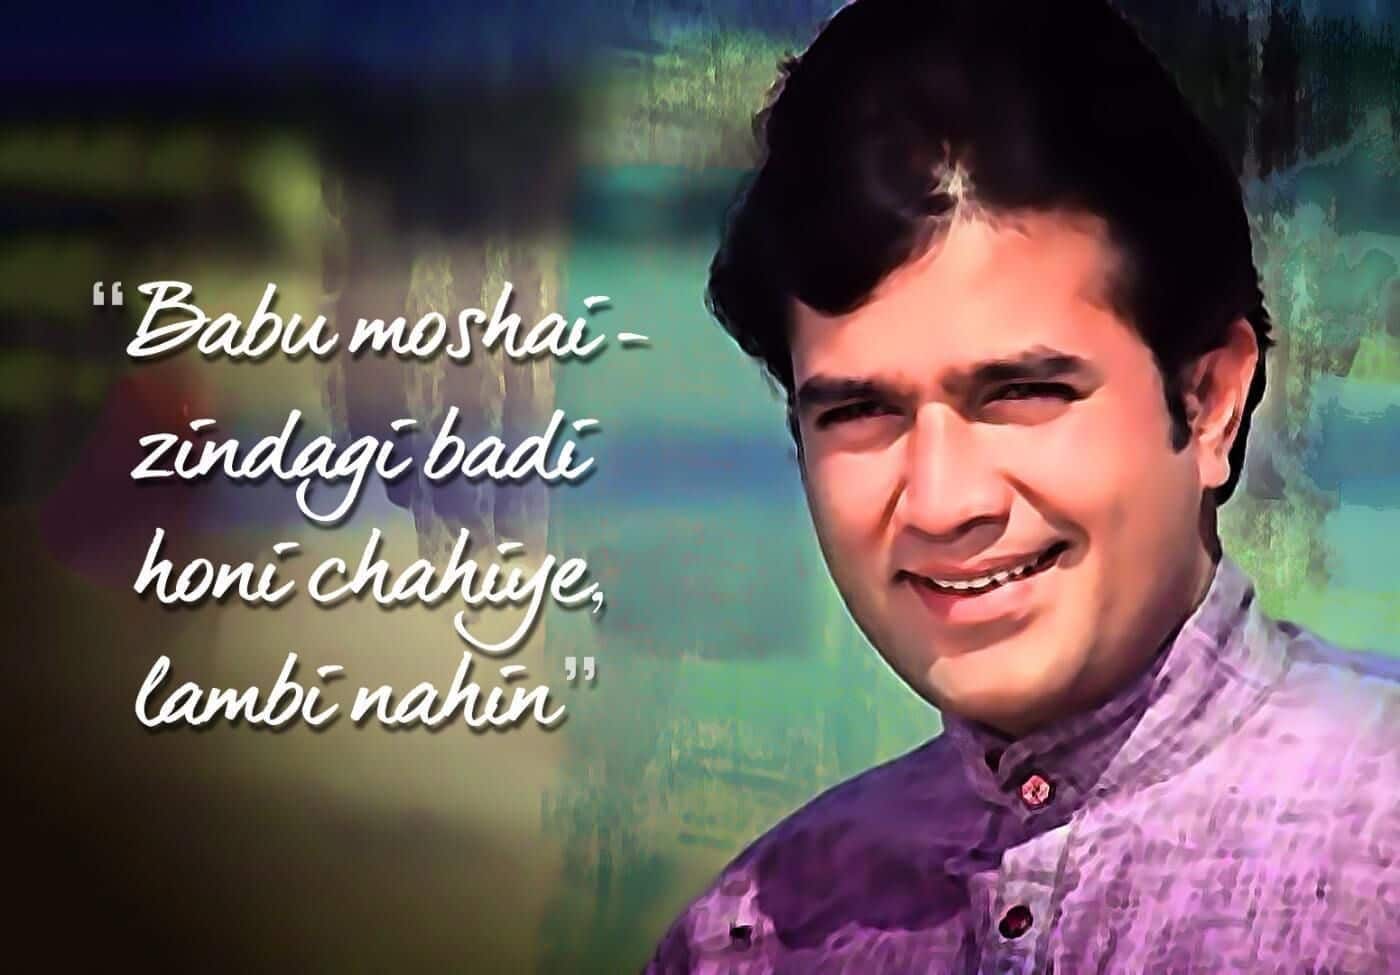 Rajesh Khanna's 'Anand' to Have a Remake and Bollywood Fans Have